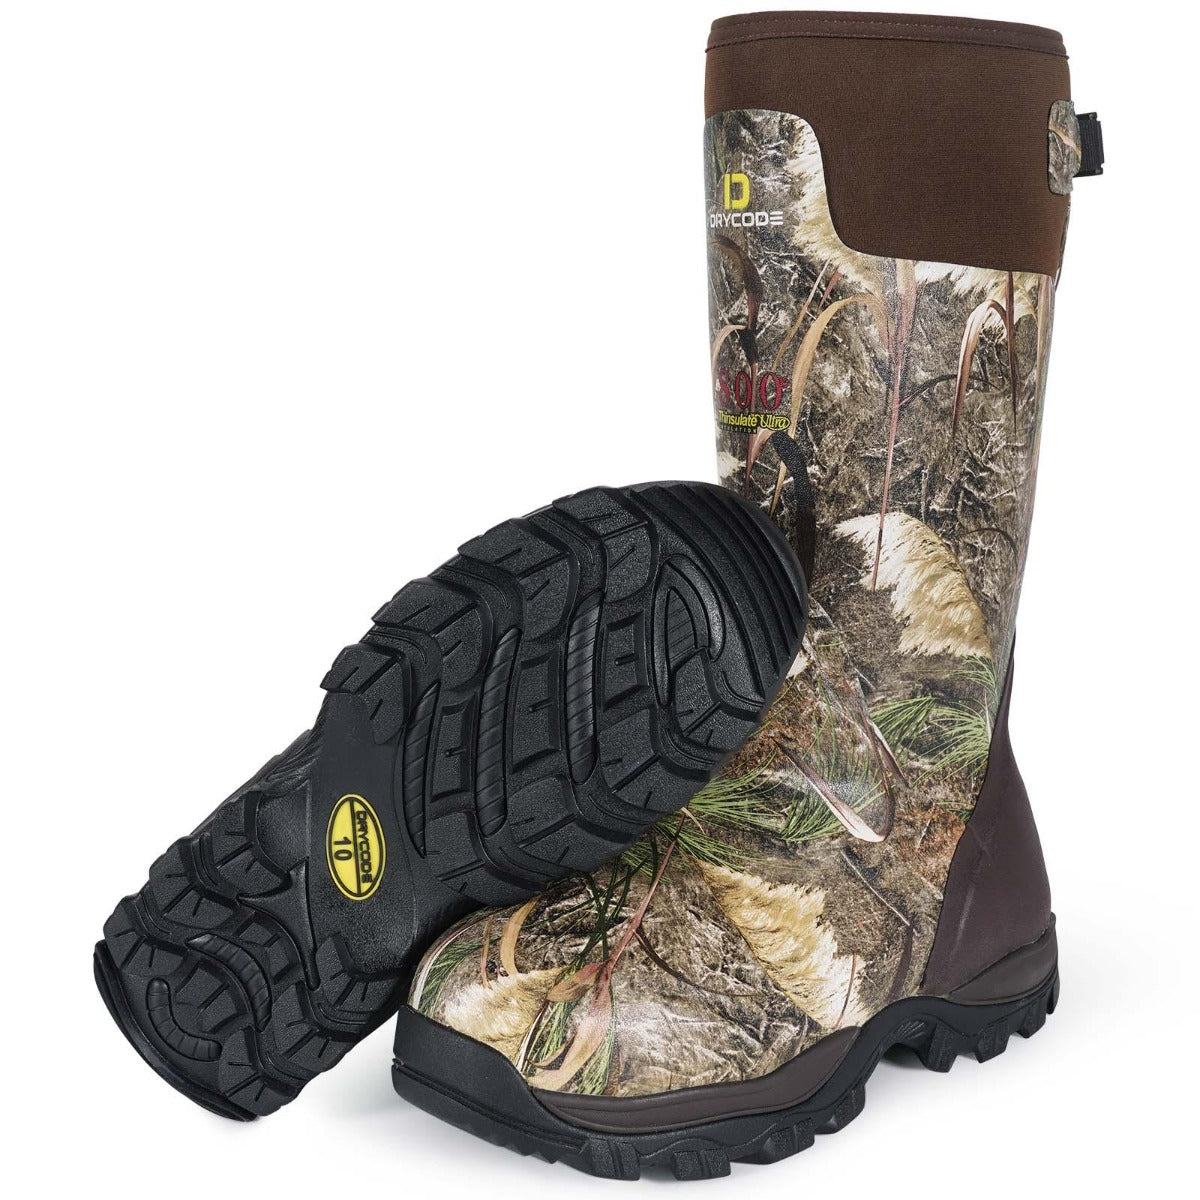 Hunting Boots for Men Waterproof 800g Insulated Camo Durable Rain Neoprene Rubber Boots - drycodeusa